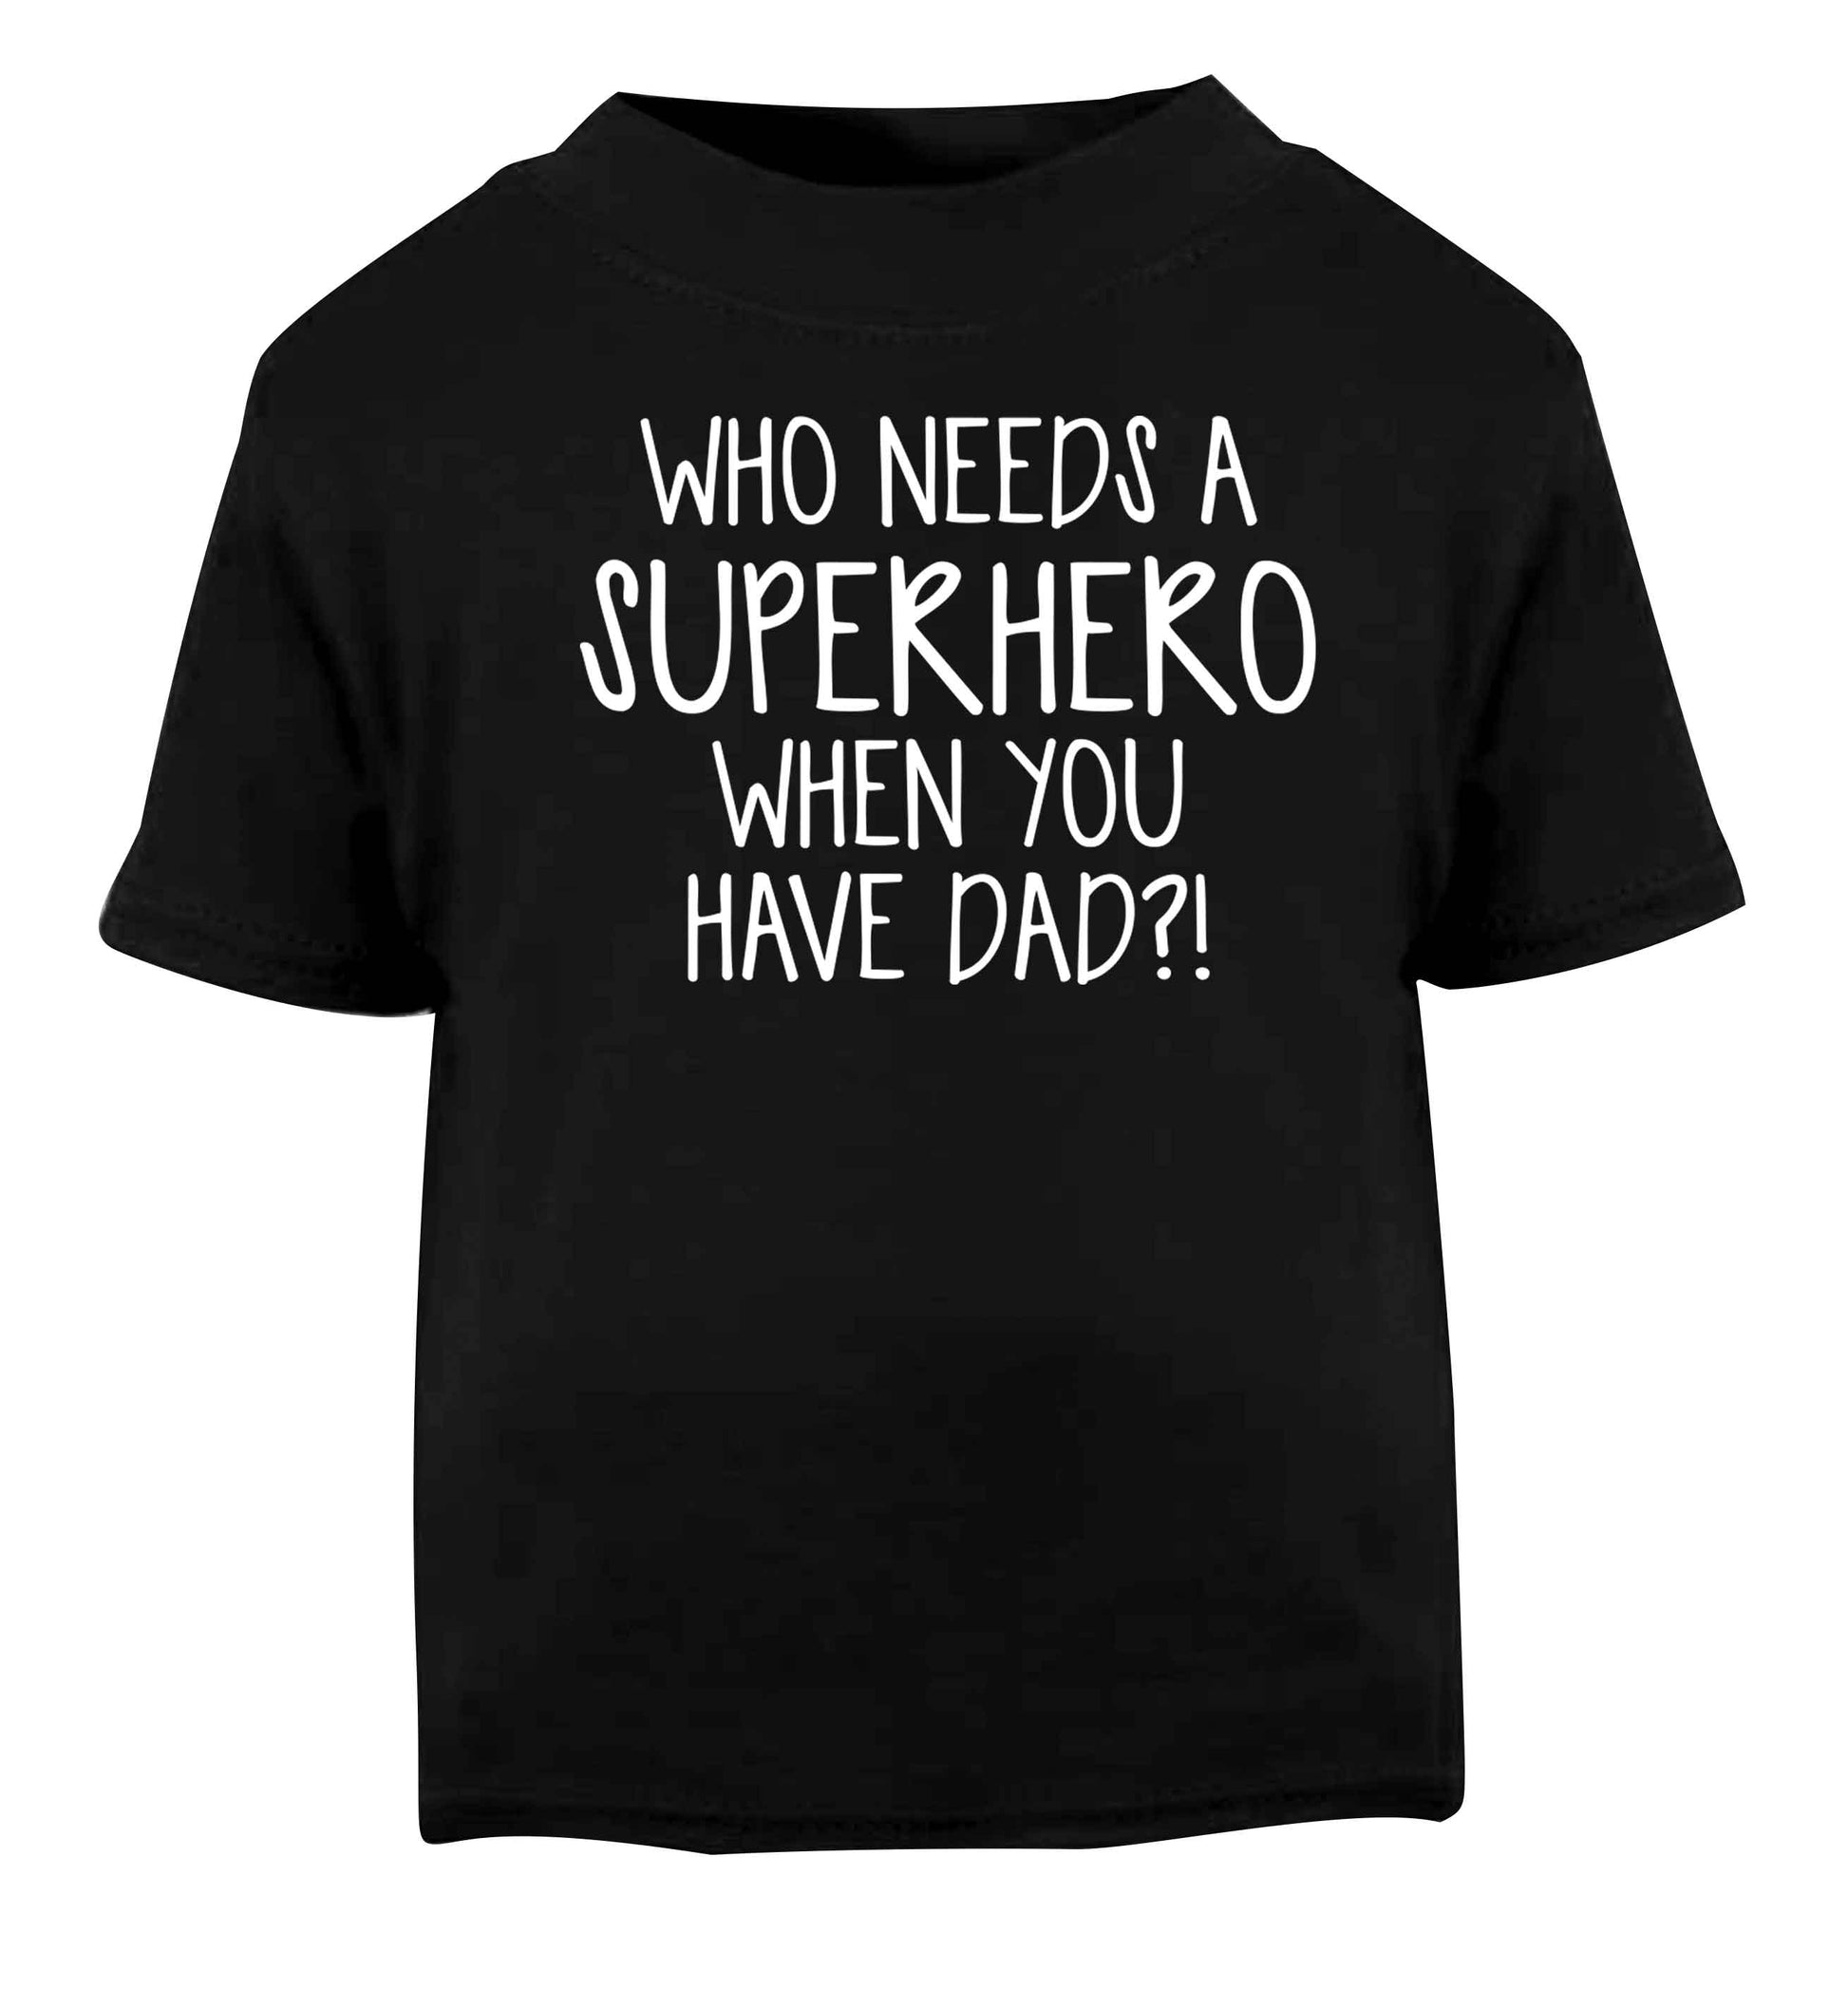 Who needs a superhero when you have dad! Black baby toddler Tshirt 2 years